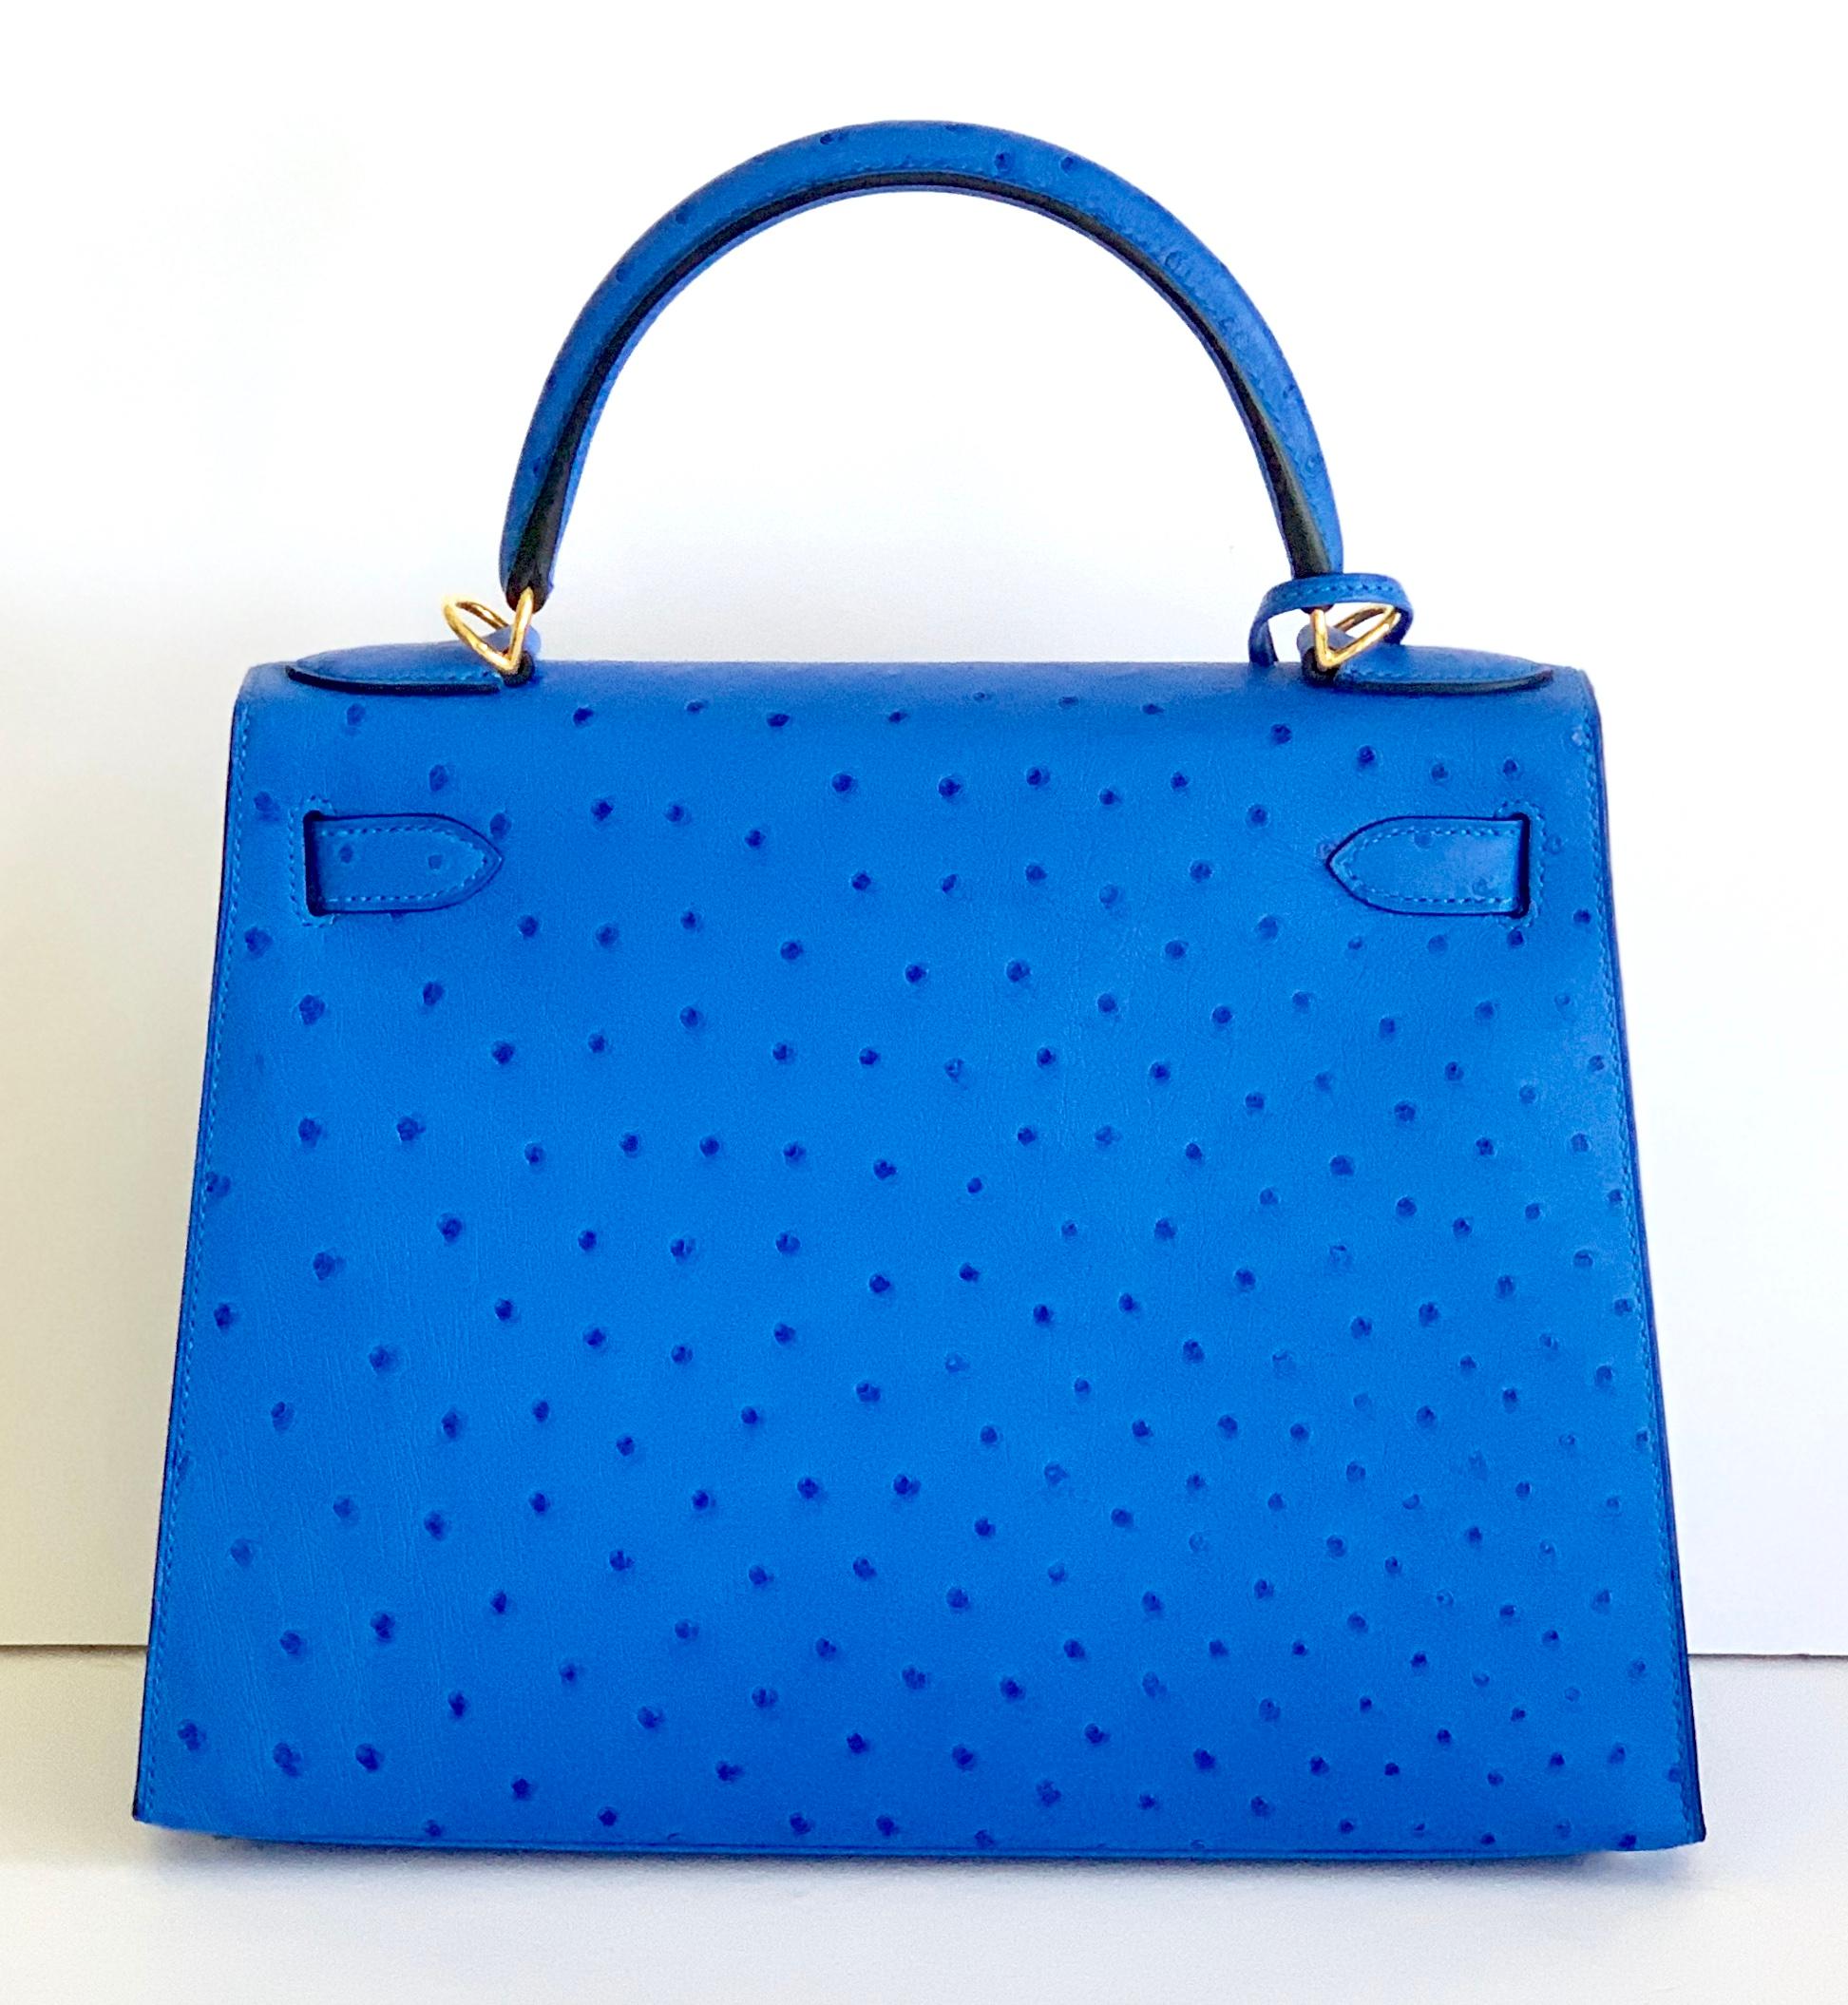 Hermes Bleuete Bright Blue  Sellier Kelly 28cm of Ostrich with gold hardware.
Plastic on the hardware

This Kelly has tonal stitching, a front toggle closure, a clochette with lock and two keys and a single rolled handle.

The interior is lined with